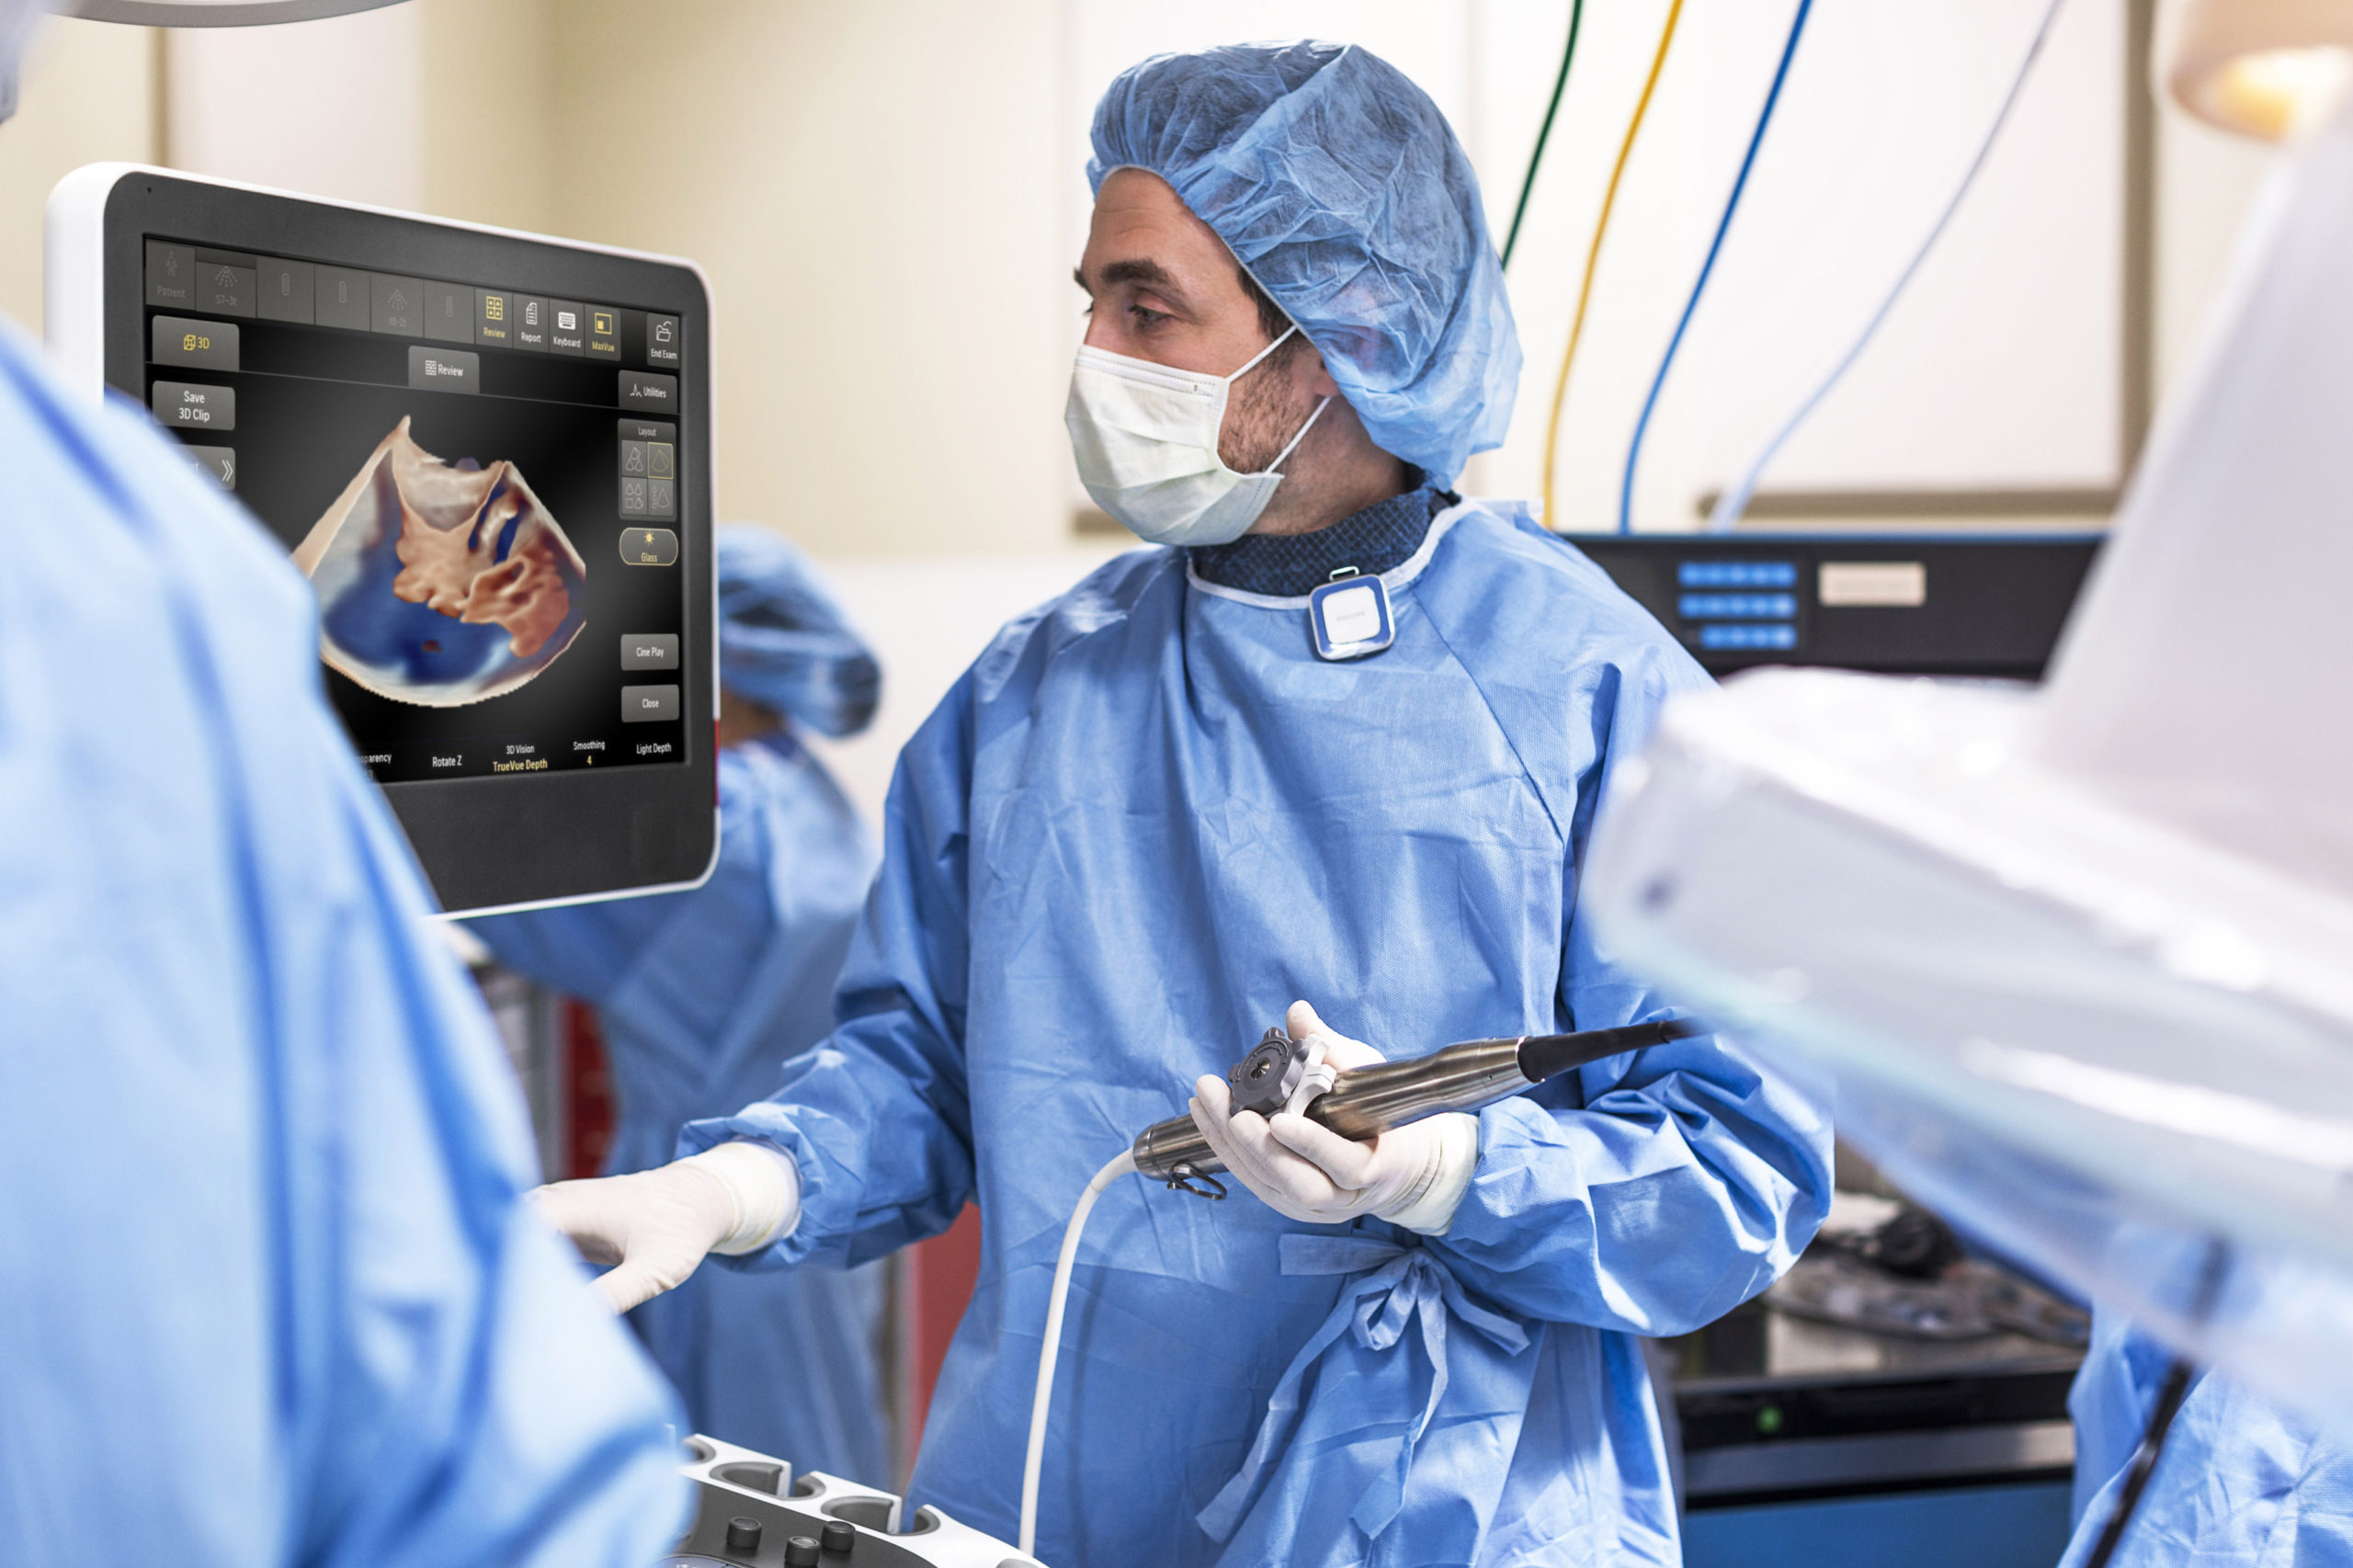 ESC 2020: Philips Debuts Impactful Solutions in Cardiology to Deliver Better Patient Care with Greater Efficiency